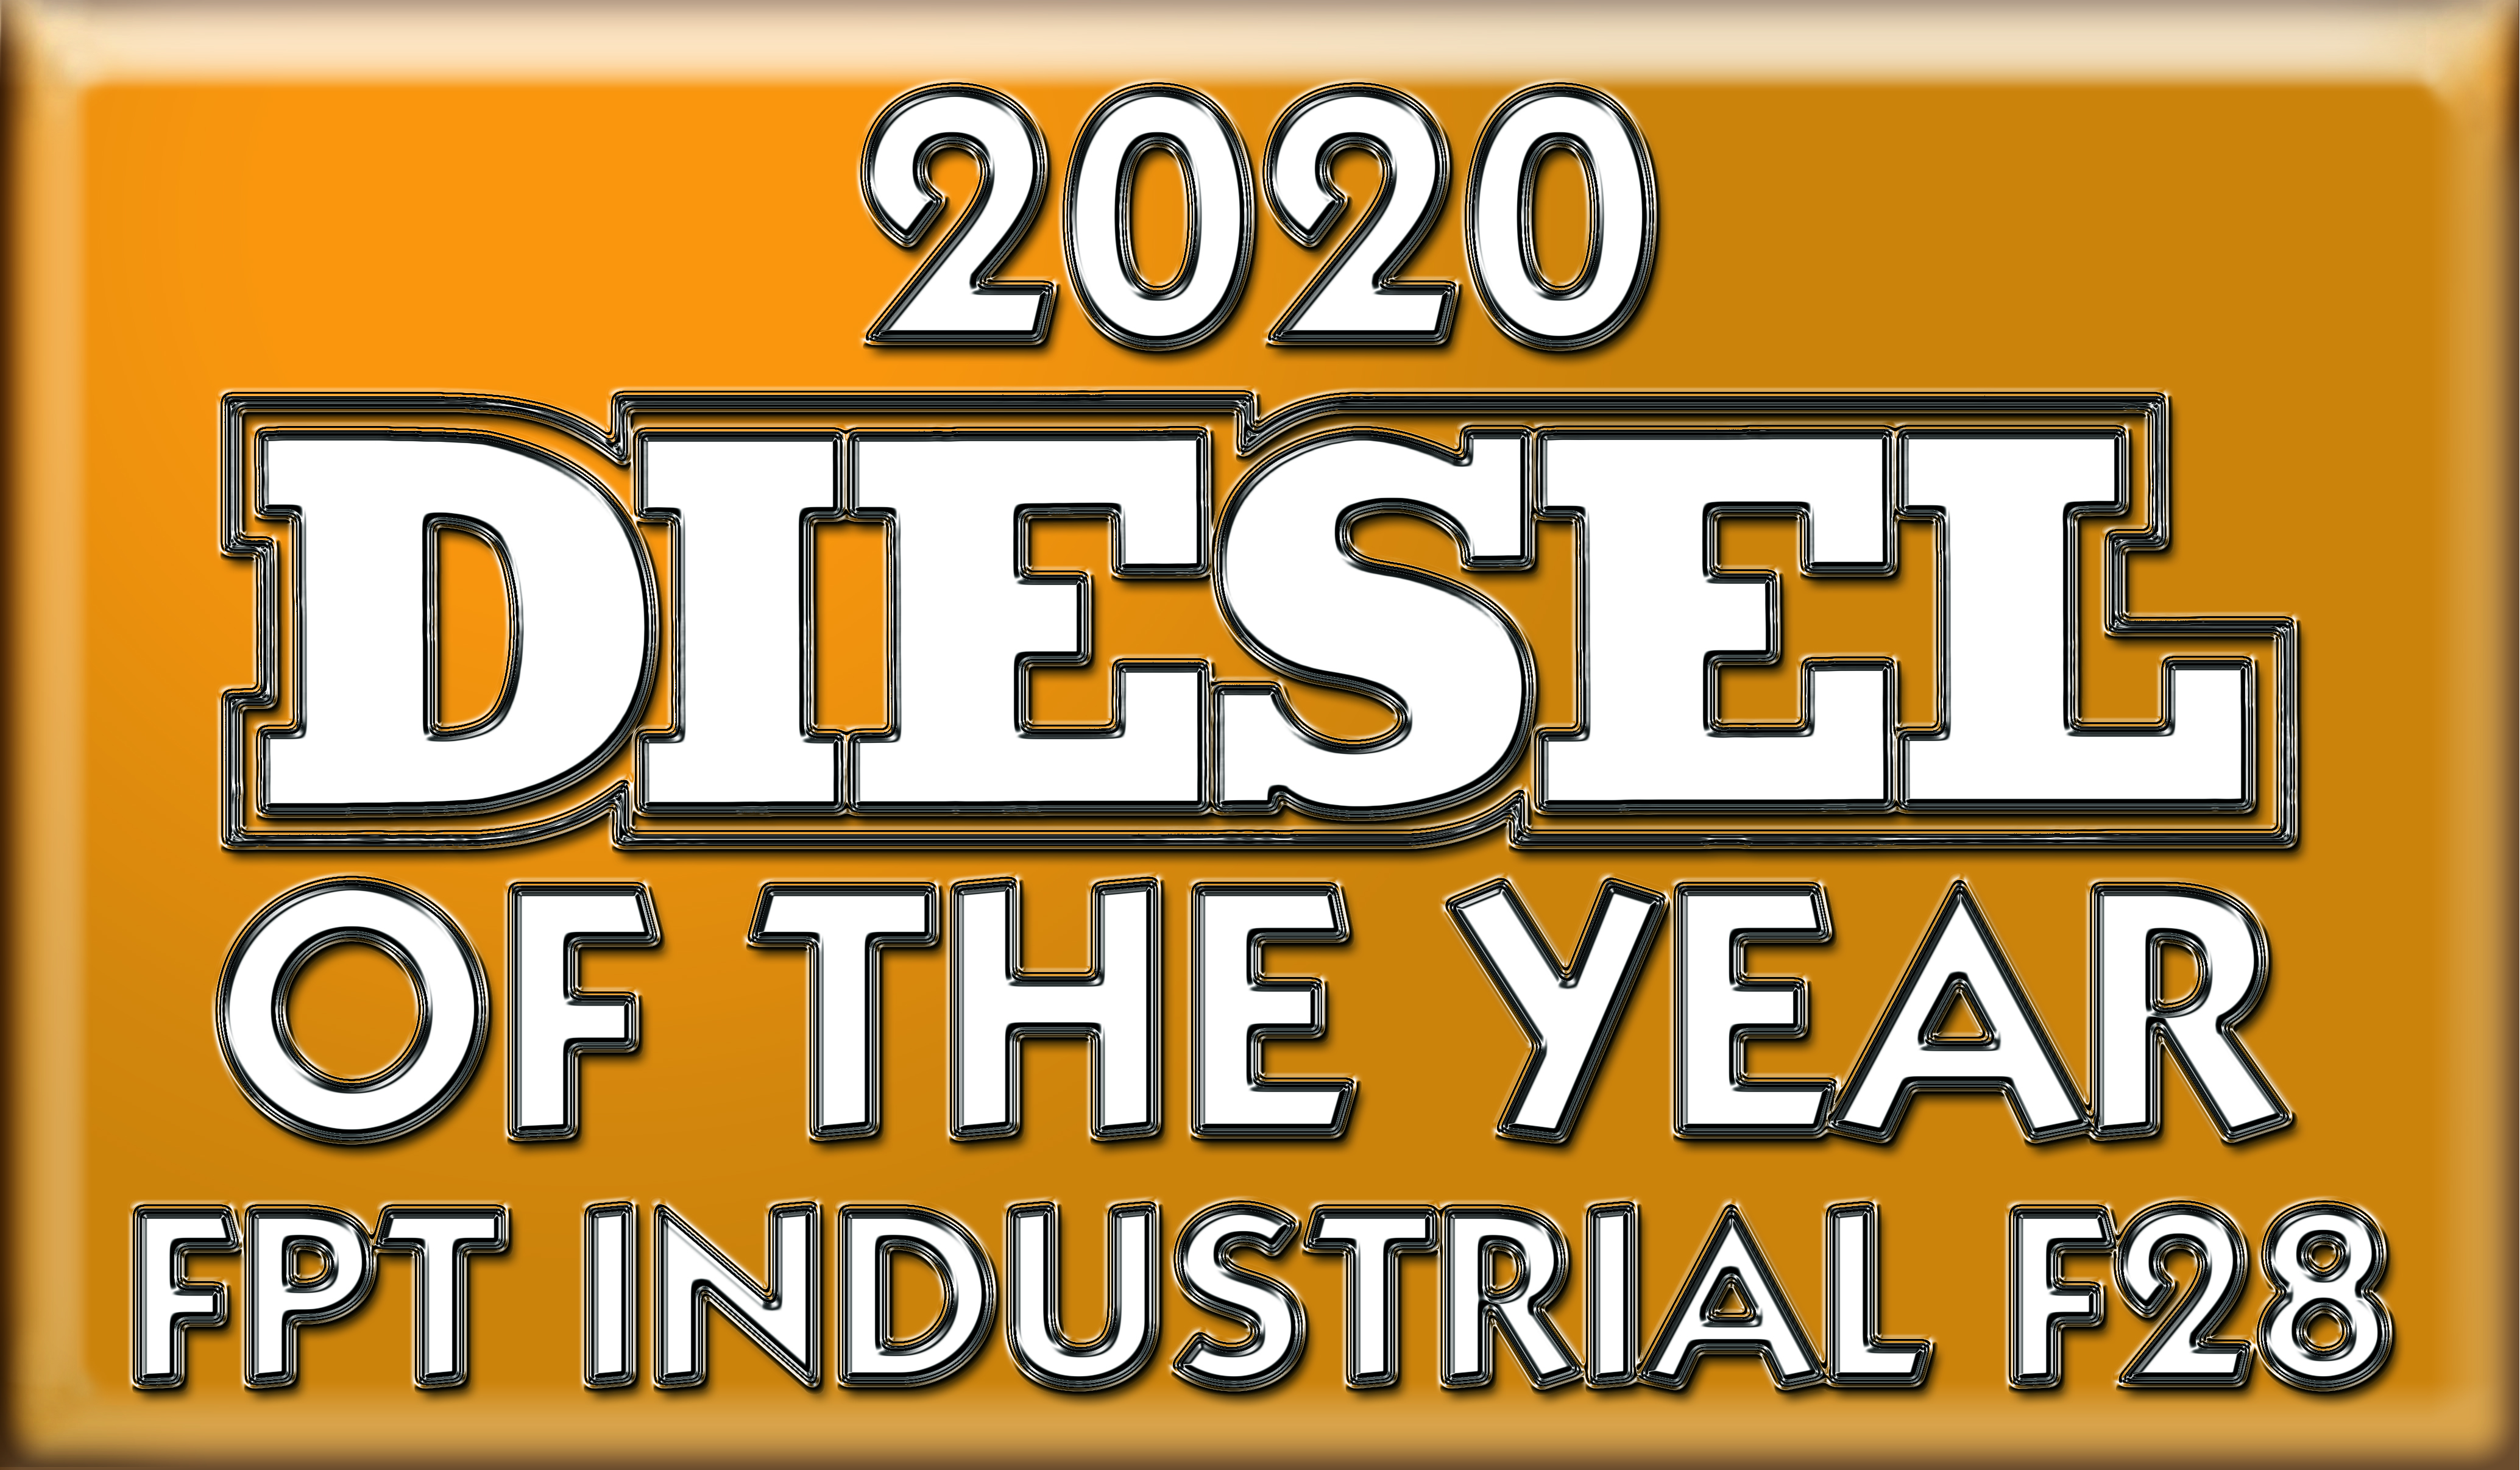 FPT Industrial is the winner of the Diesel of the Year 2020